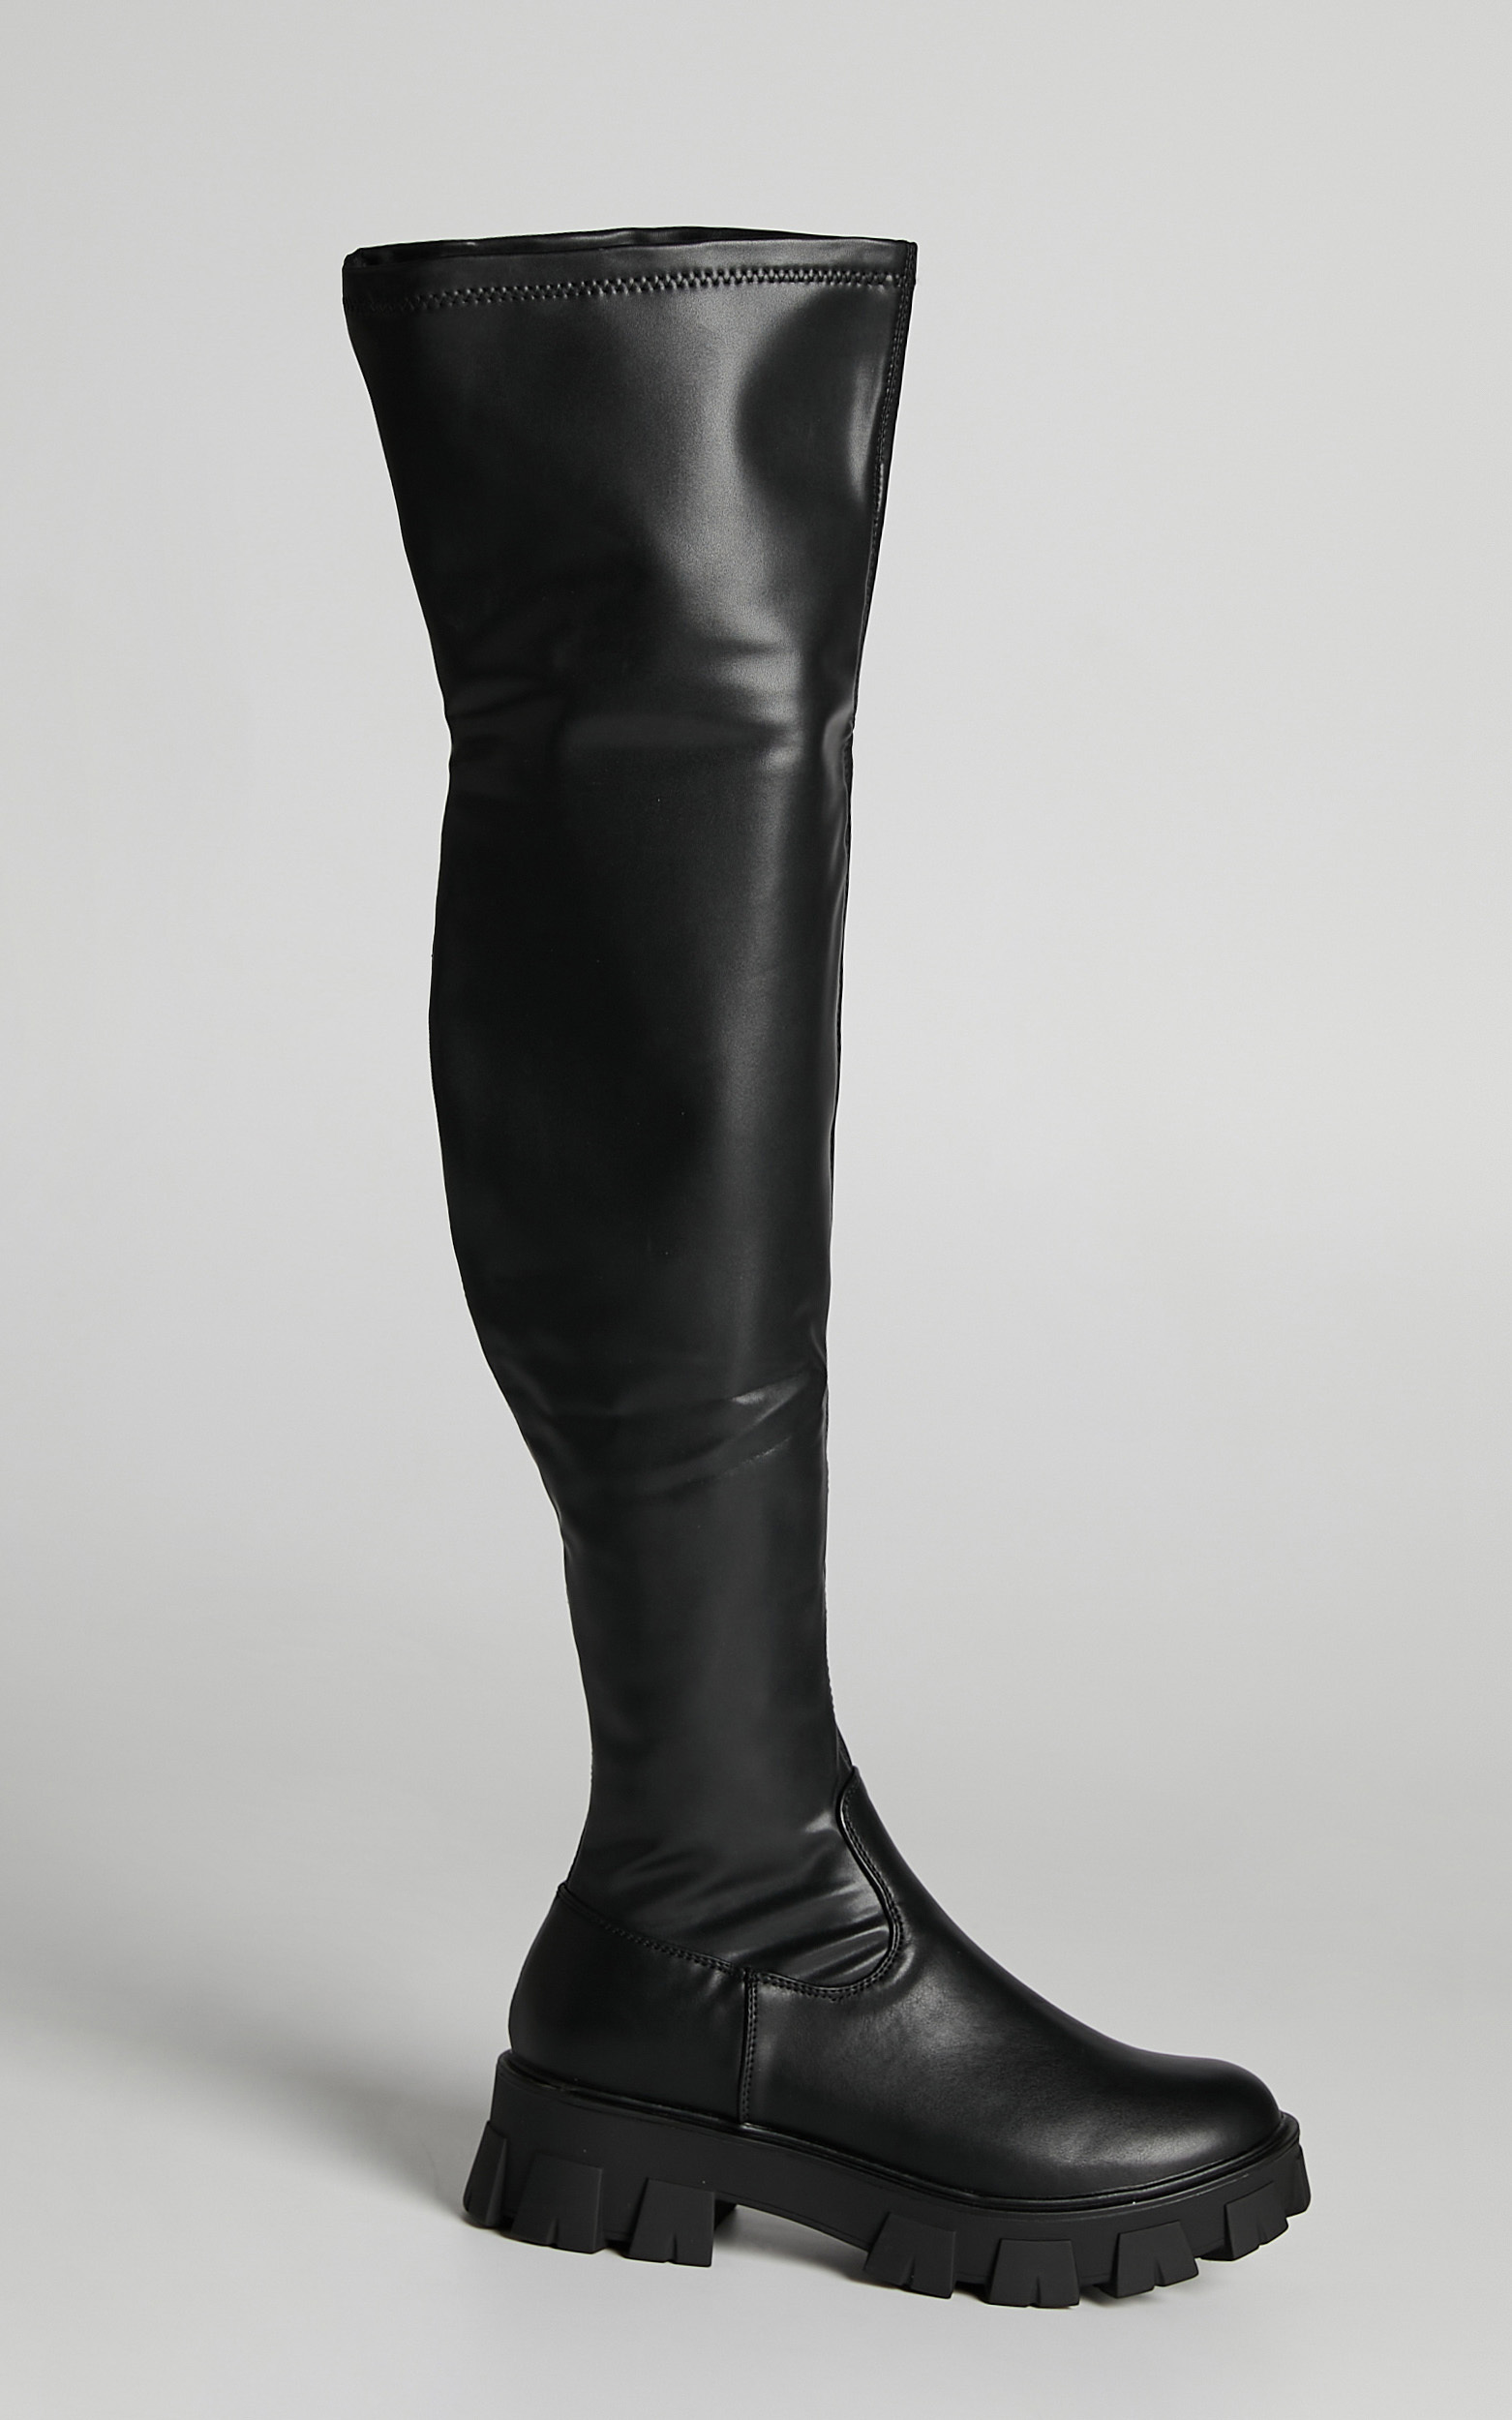 Therapy - Spice Boots in Black Matte - 05, BLK1, hi-res image number null